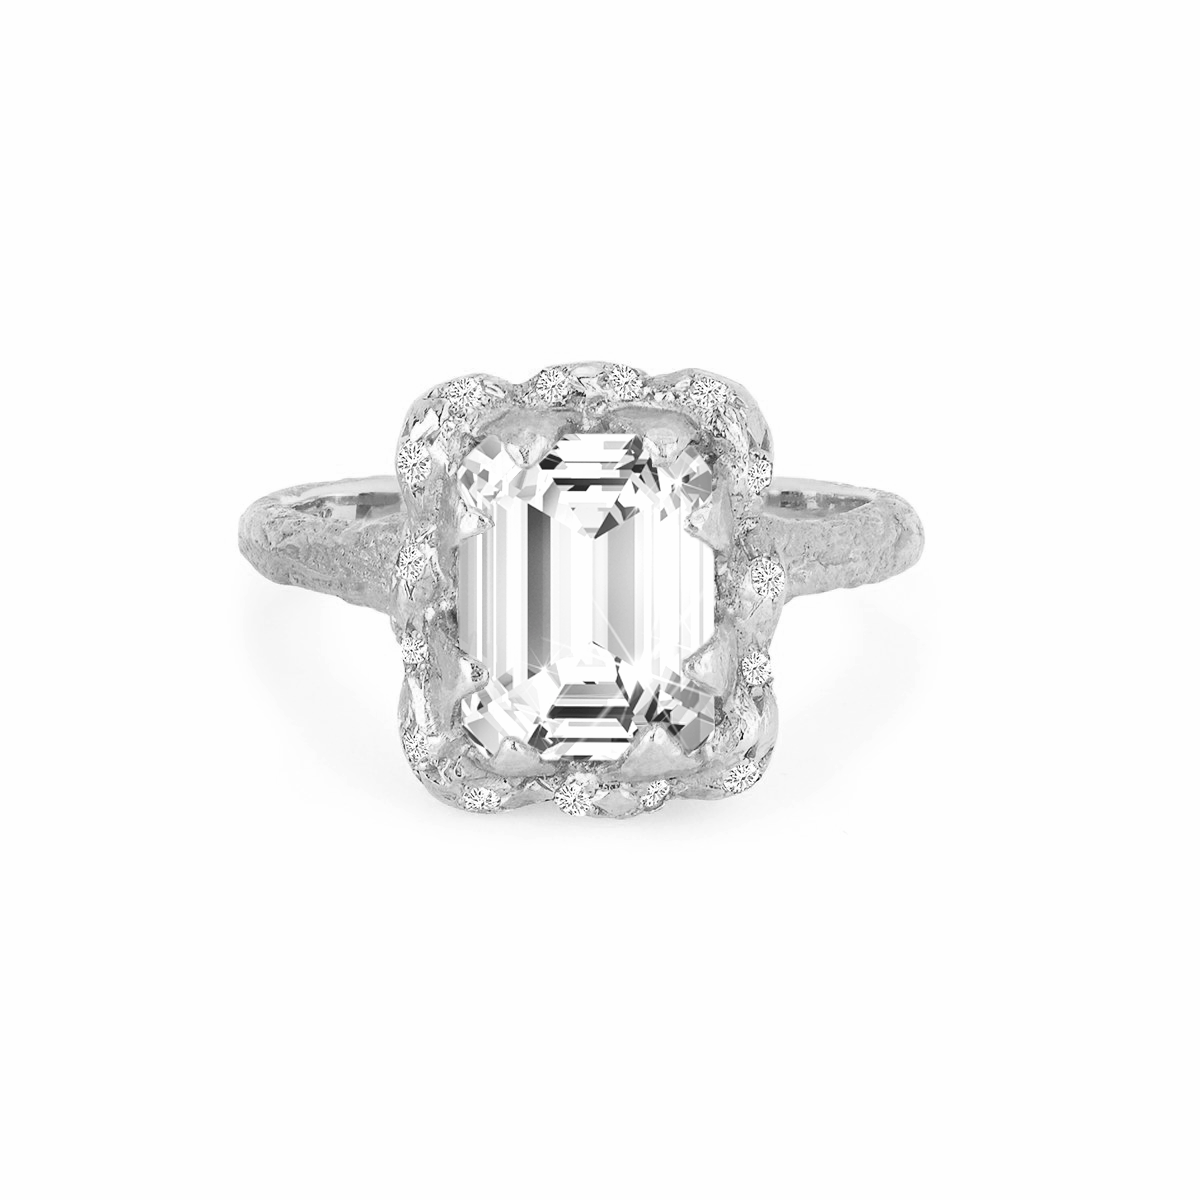 Queen Emerald Cut Diamond Setting with Sprinkled Halo